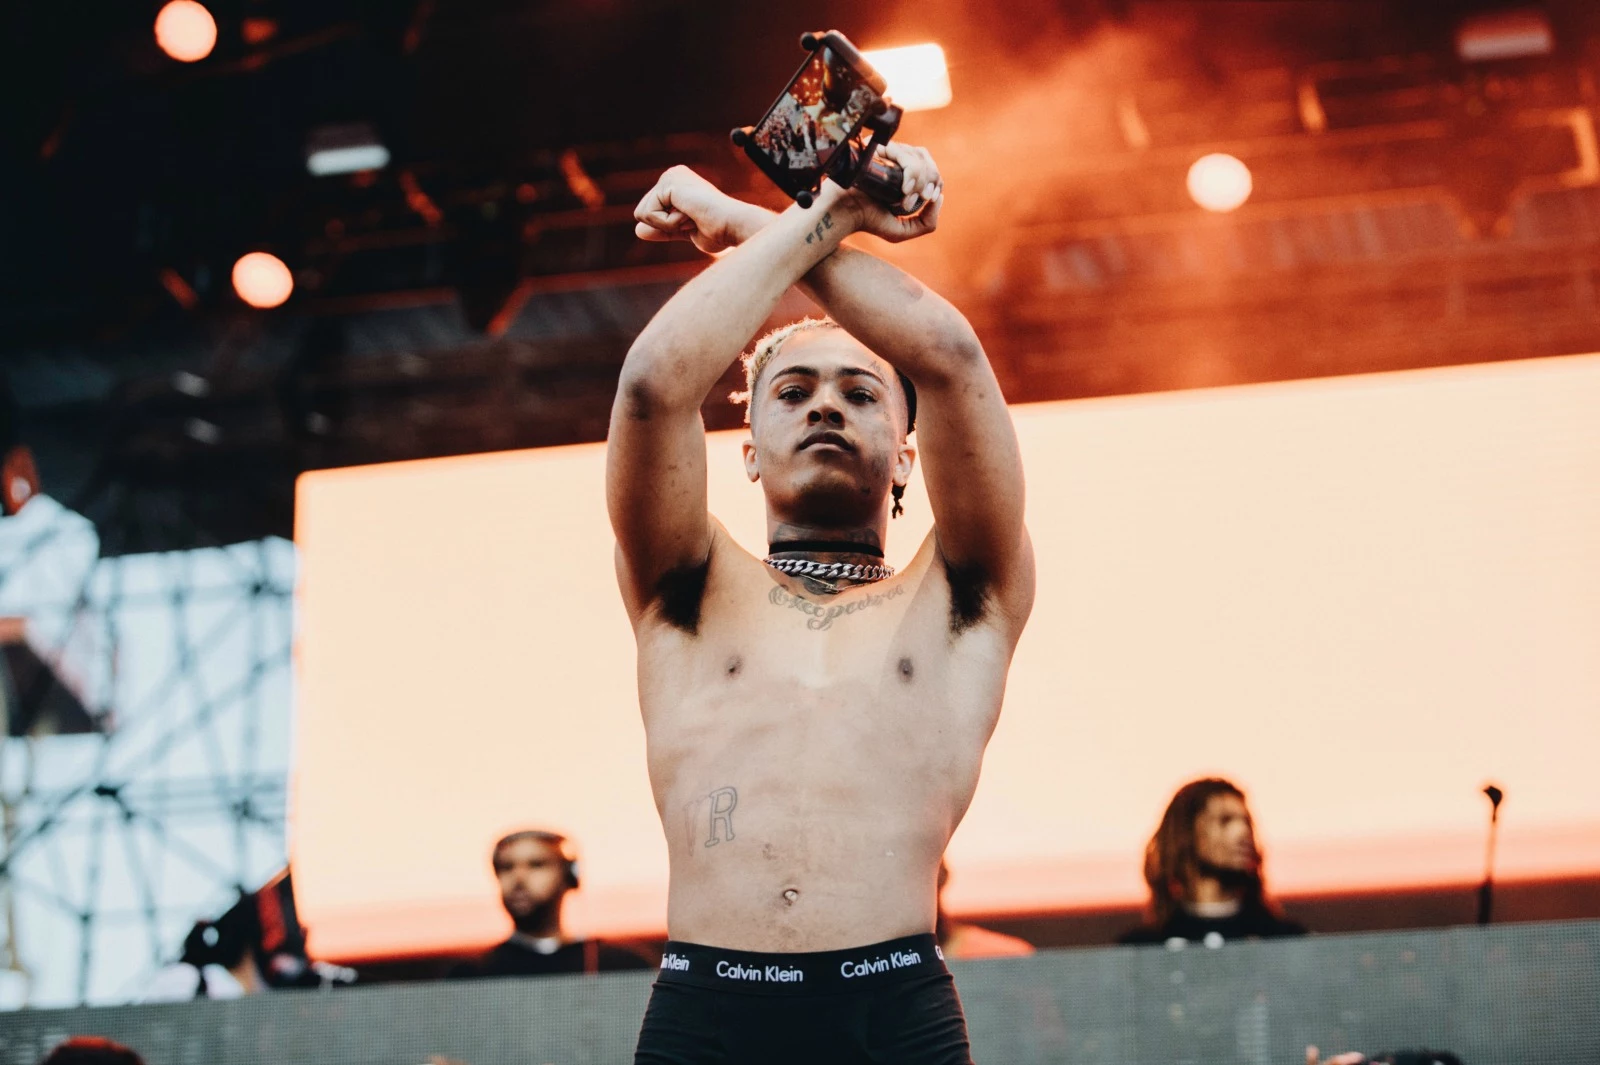 XXXTentacion Performs 'Look at Me' and More at 2017 Rolling Loud Festival -  XXL